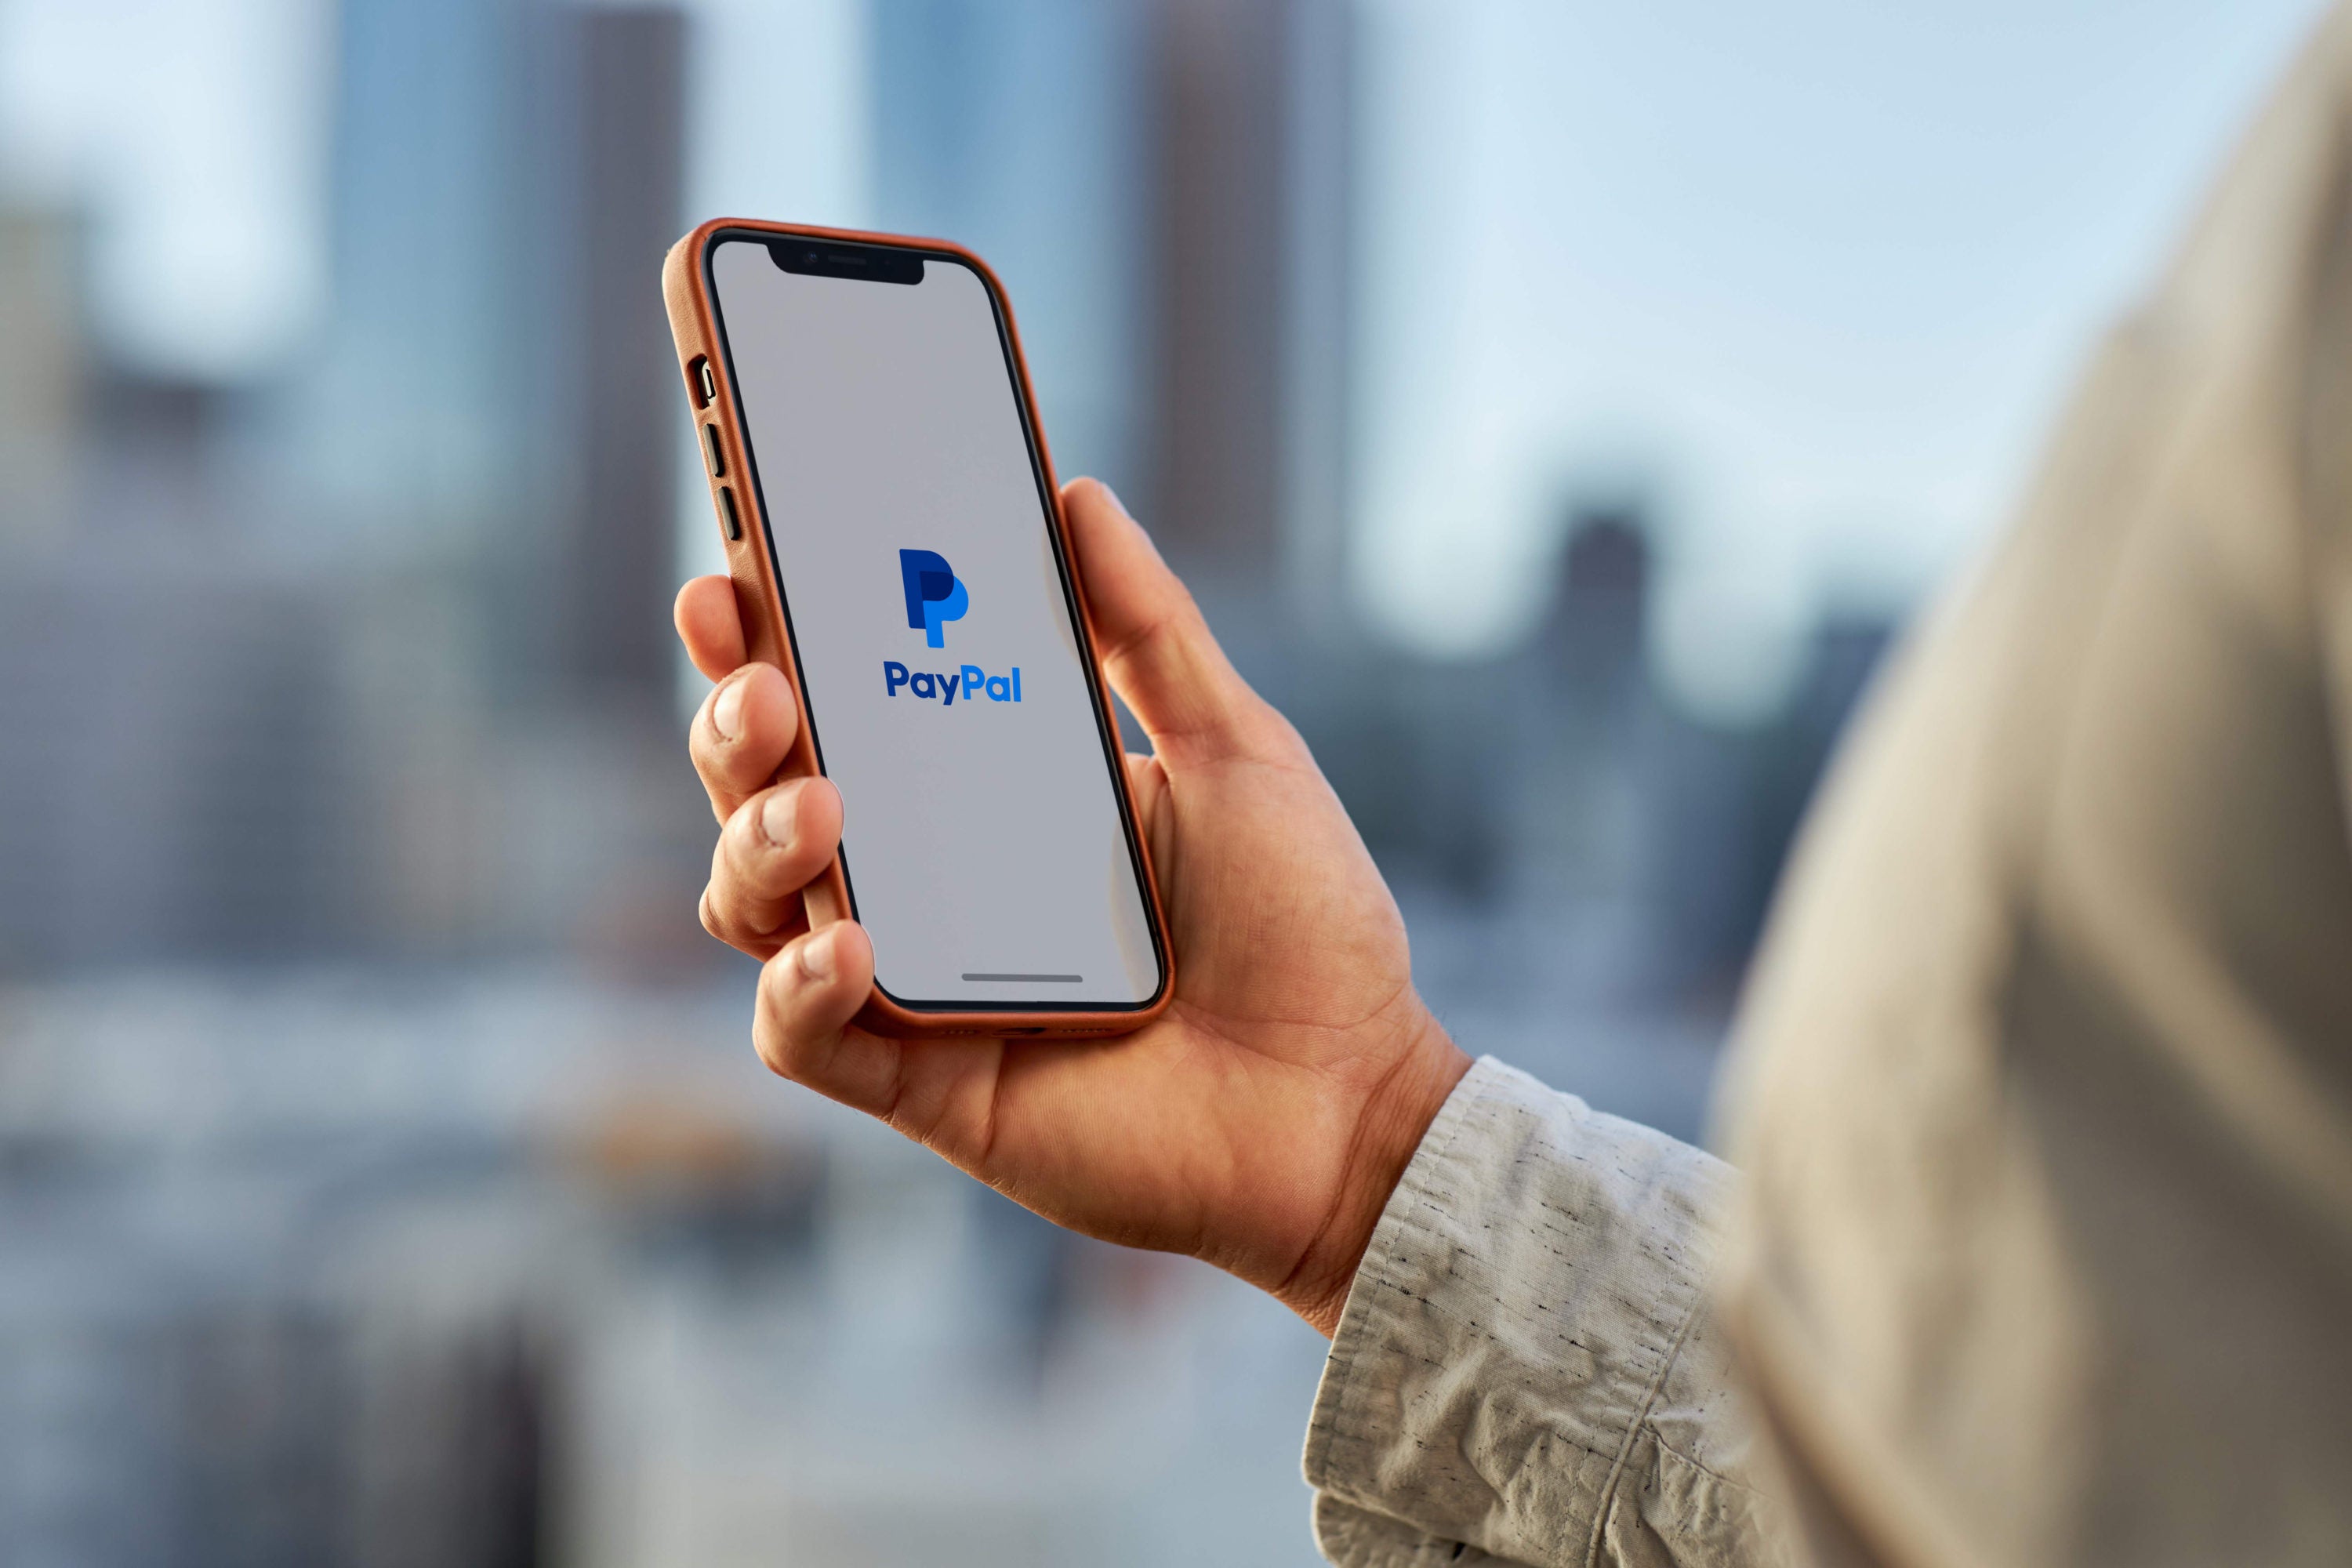 PayPal app on phone outdoors